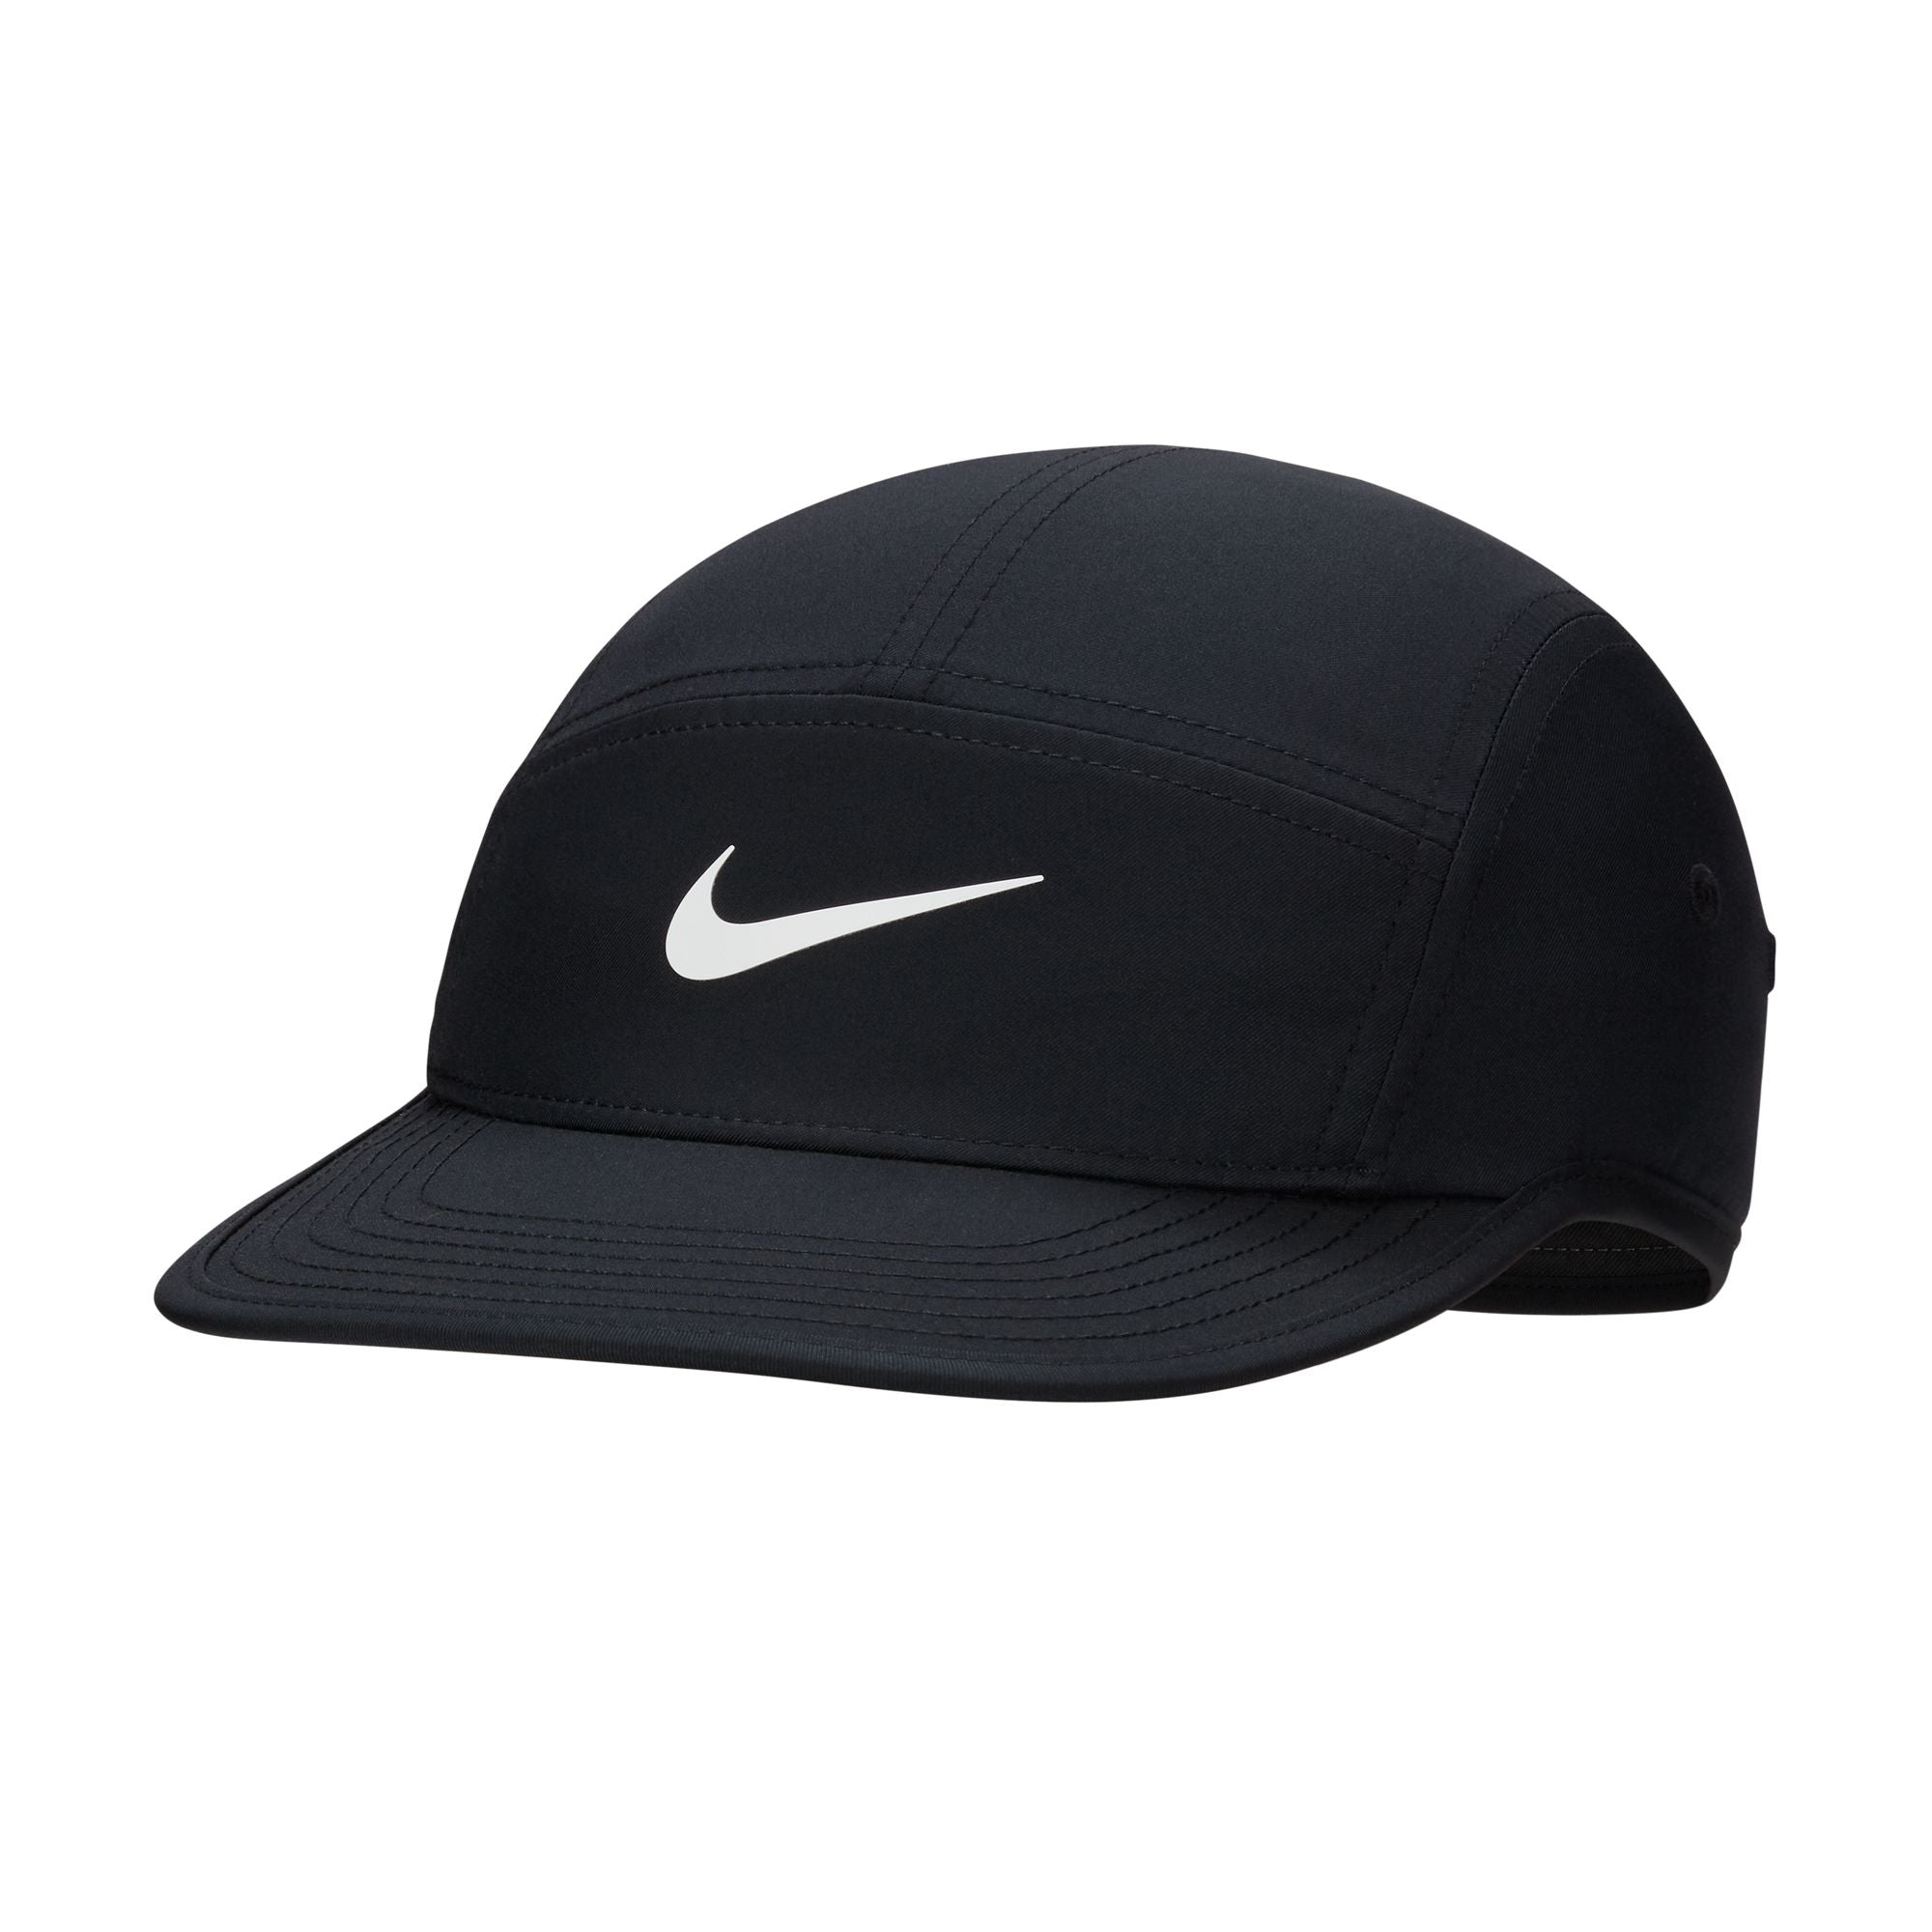 Black Nike five panel cap with white swoosh. Free uk shipping for orders over £50